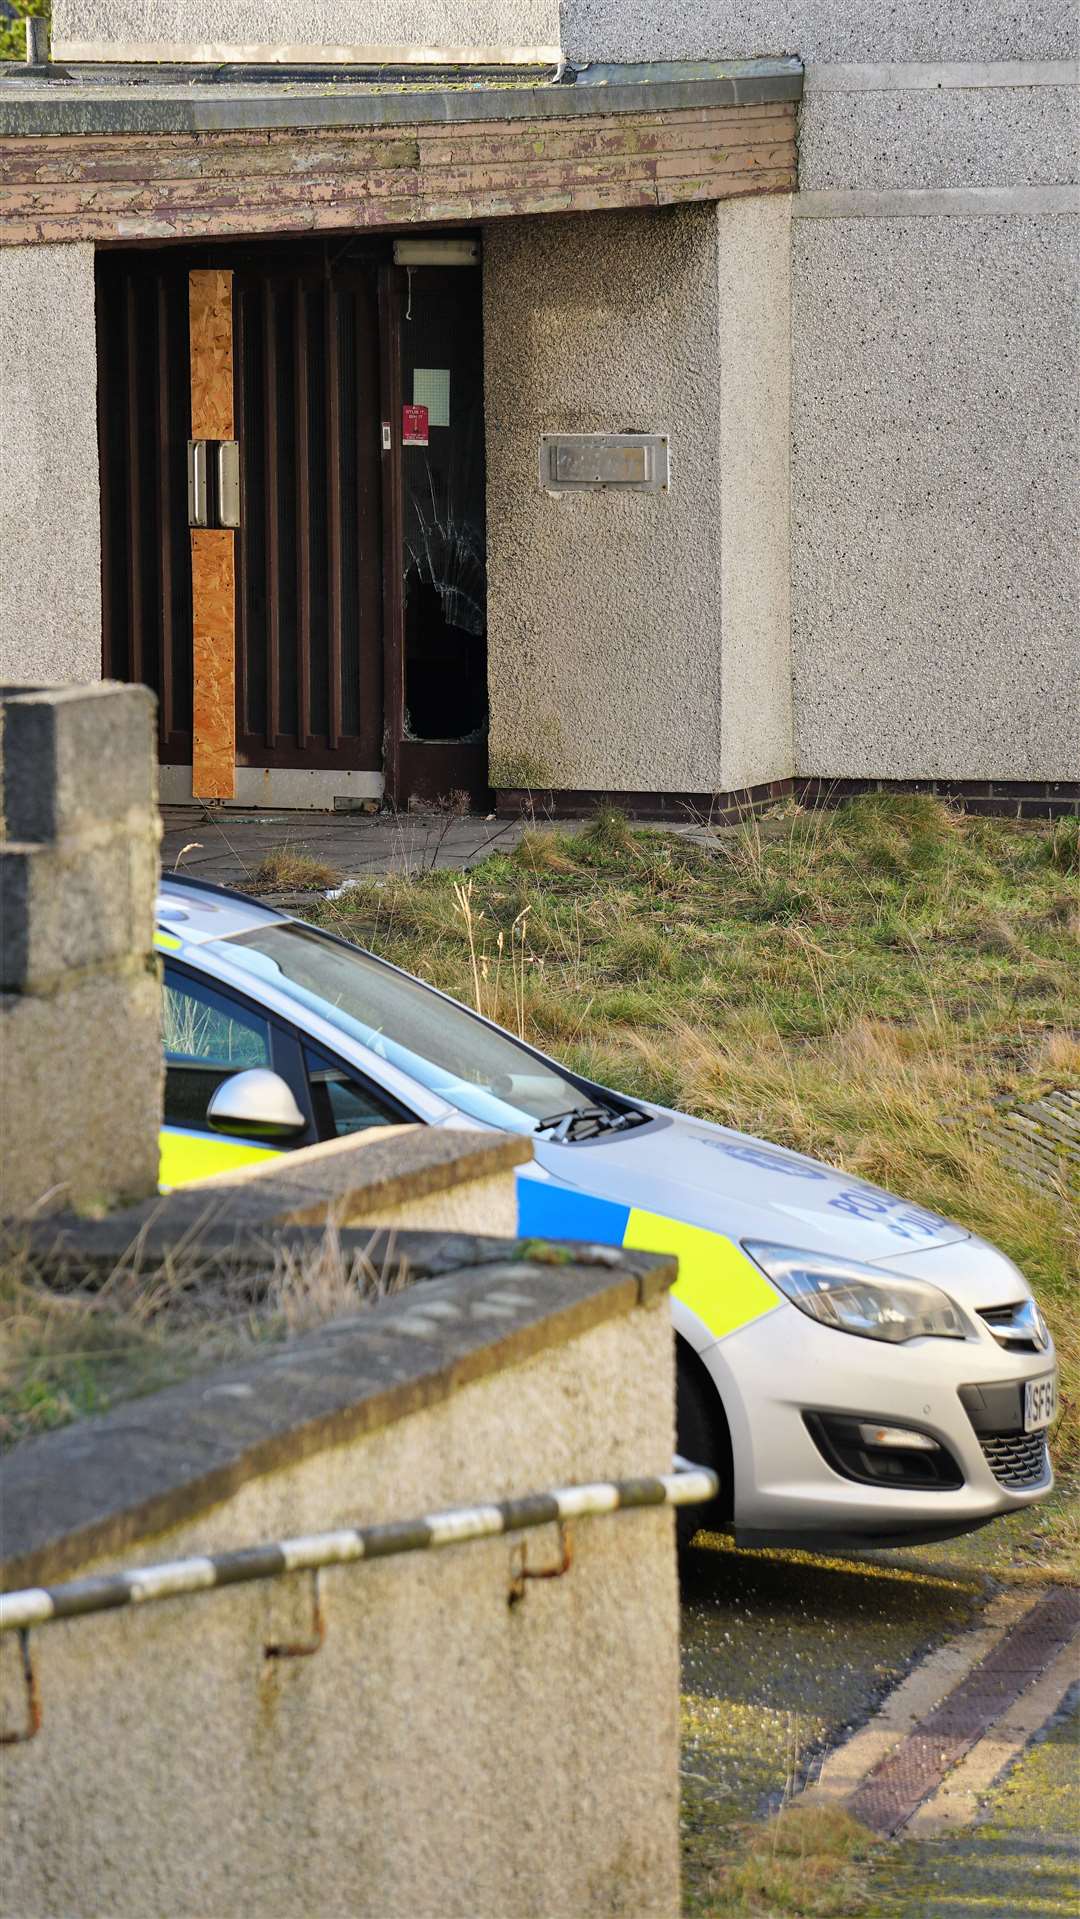 Police investigate the alleged cannabis farm at Girnigoe Street in Wick. Picture: DGS